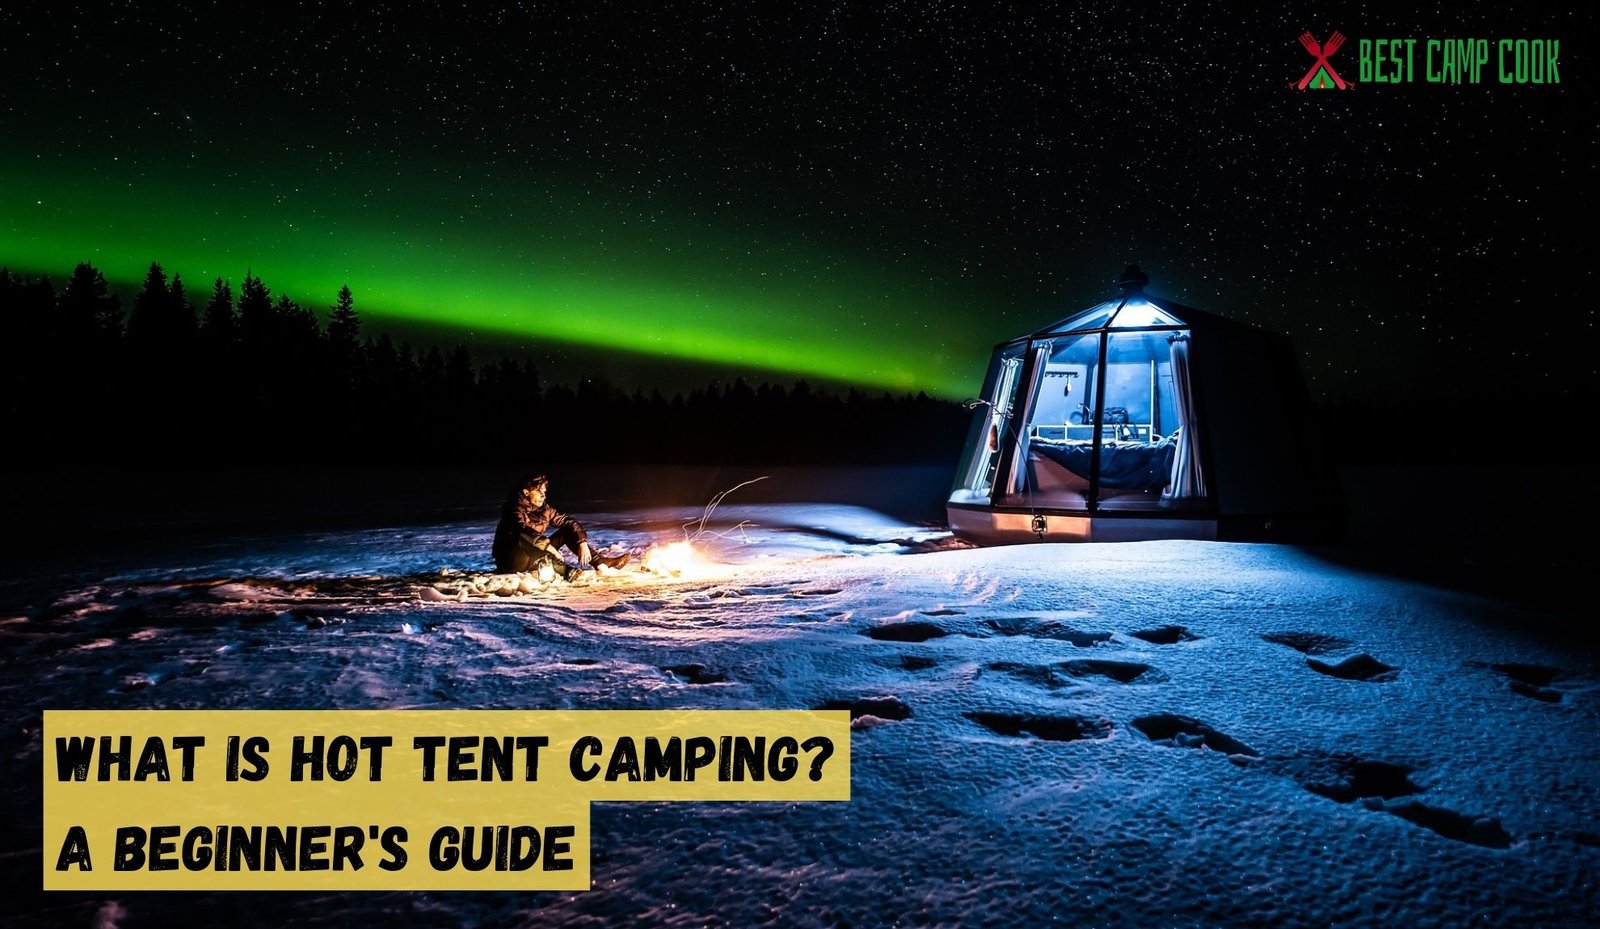 What is Hot Tent Camping